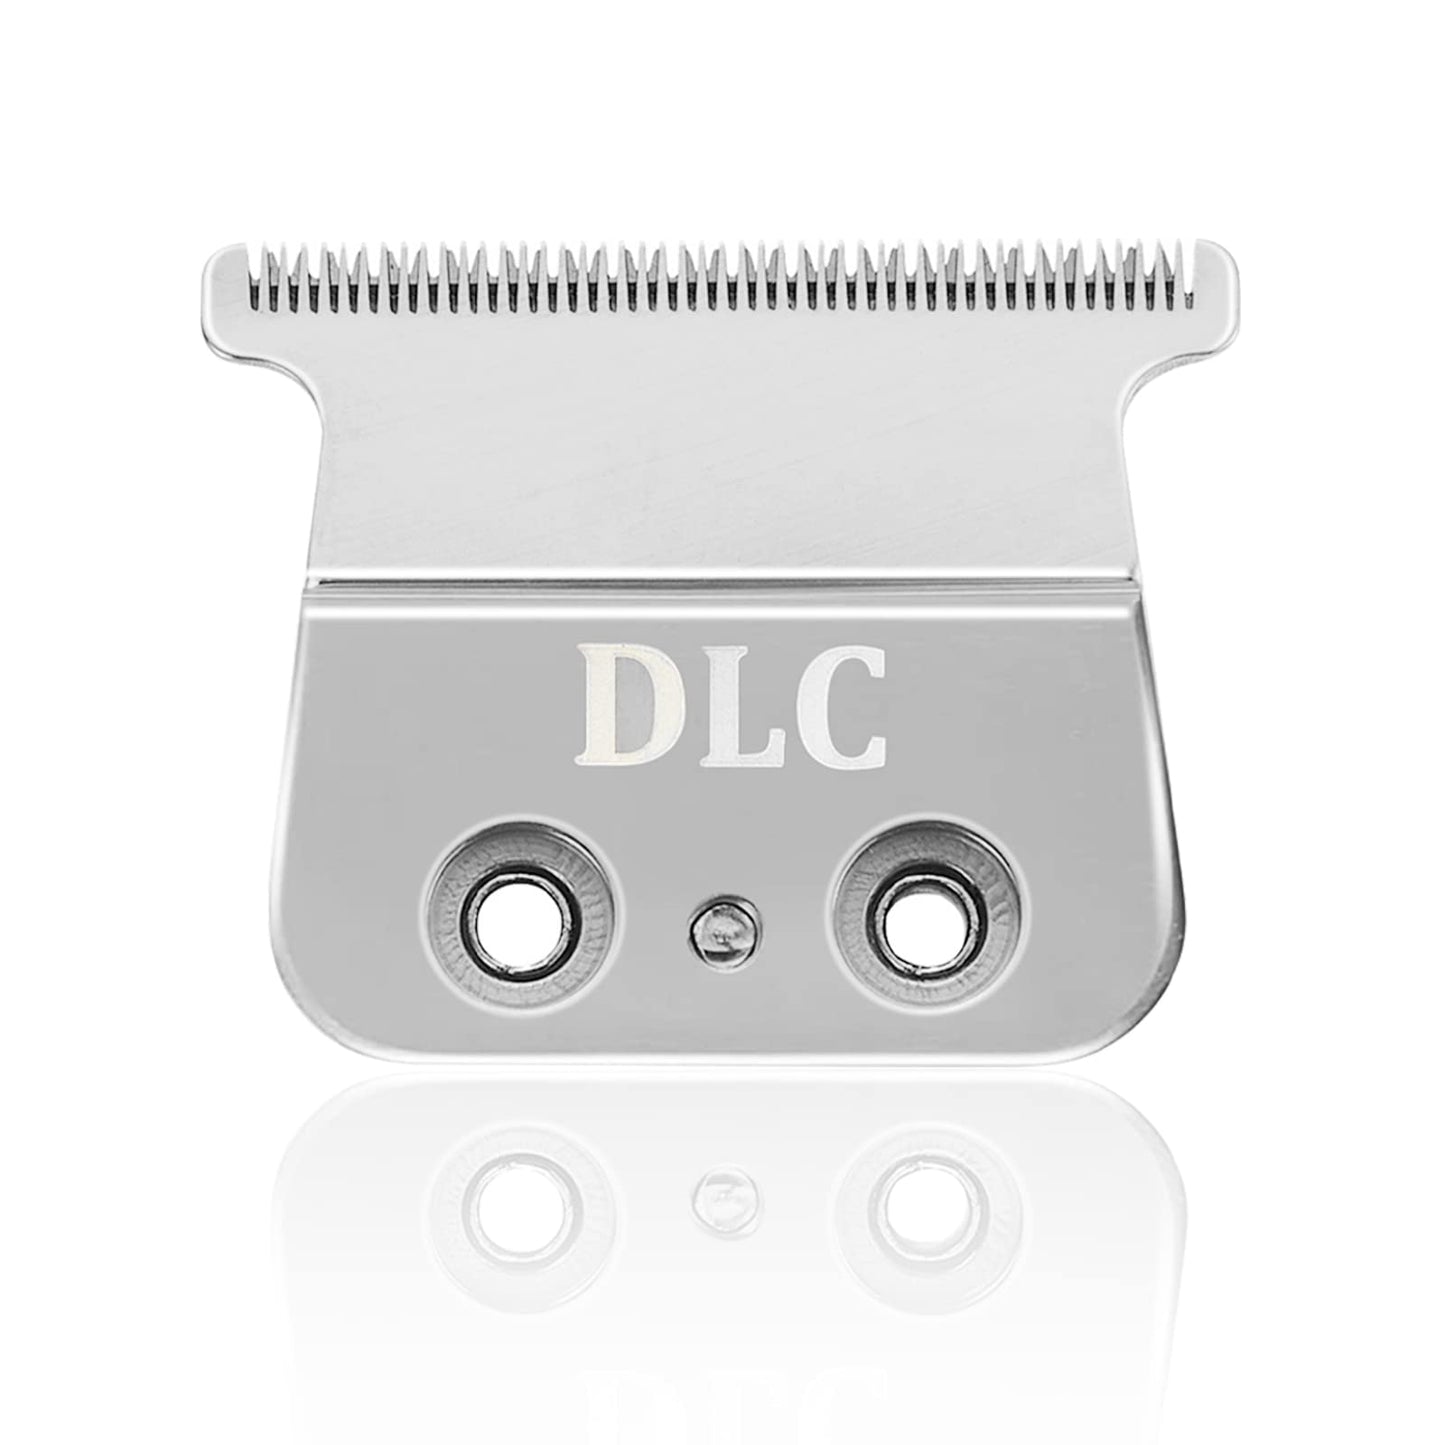 FX707Z Replacement DLC 2.0 Trimmer Blade Compatible with Babyliss FX787 & FX726 Trimmer,Compatible with Babyliss DLC 2.0 Trimmer Blade,Silver Visit the Audoc Store